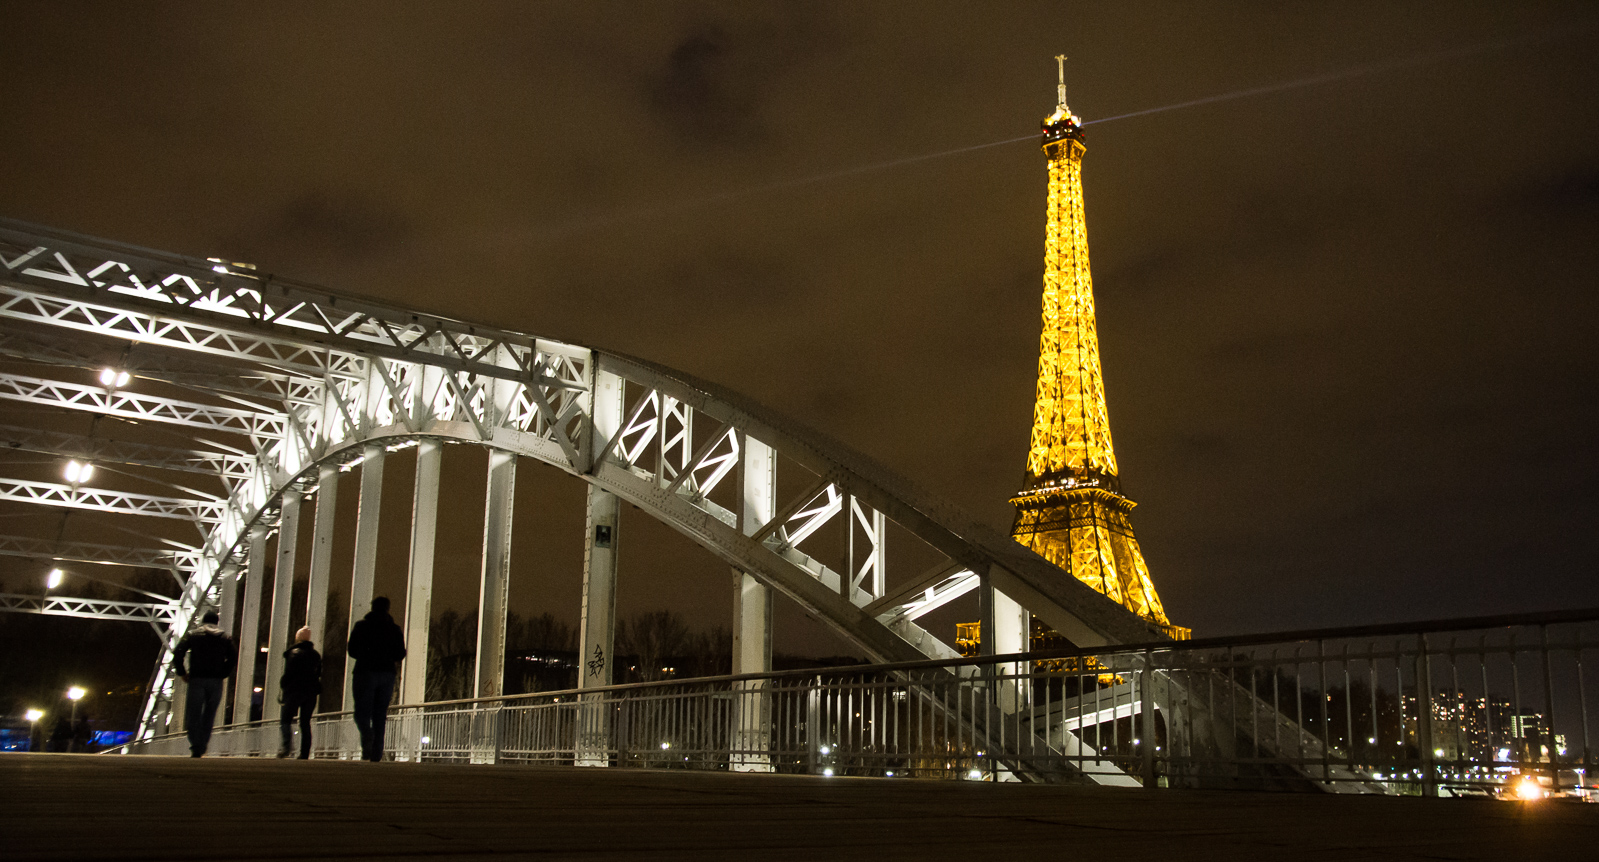 Getting to Paris from the airport by car with a view on the Eiffel Tower at night.